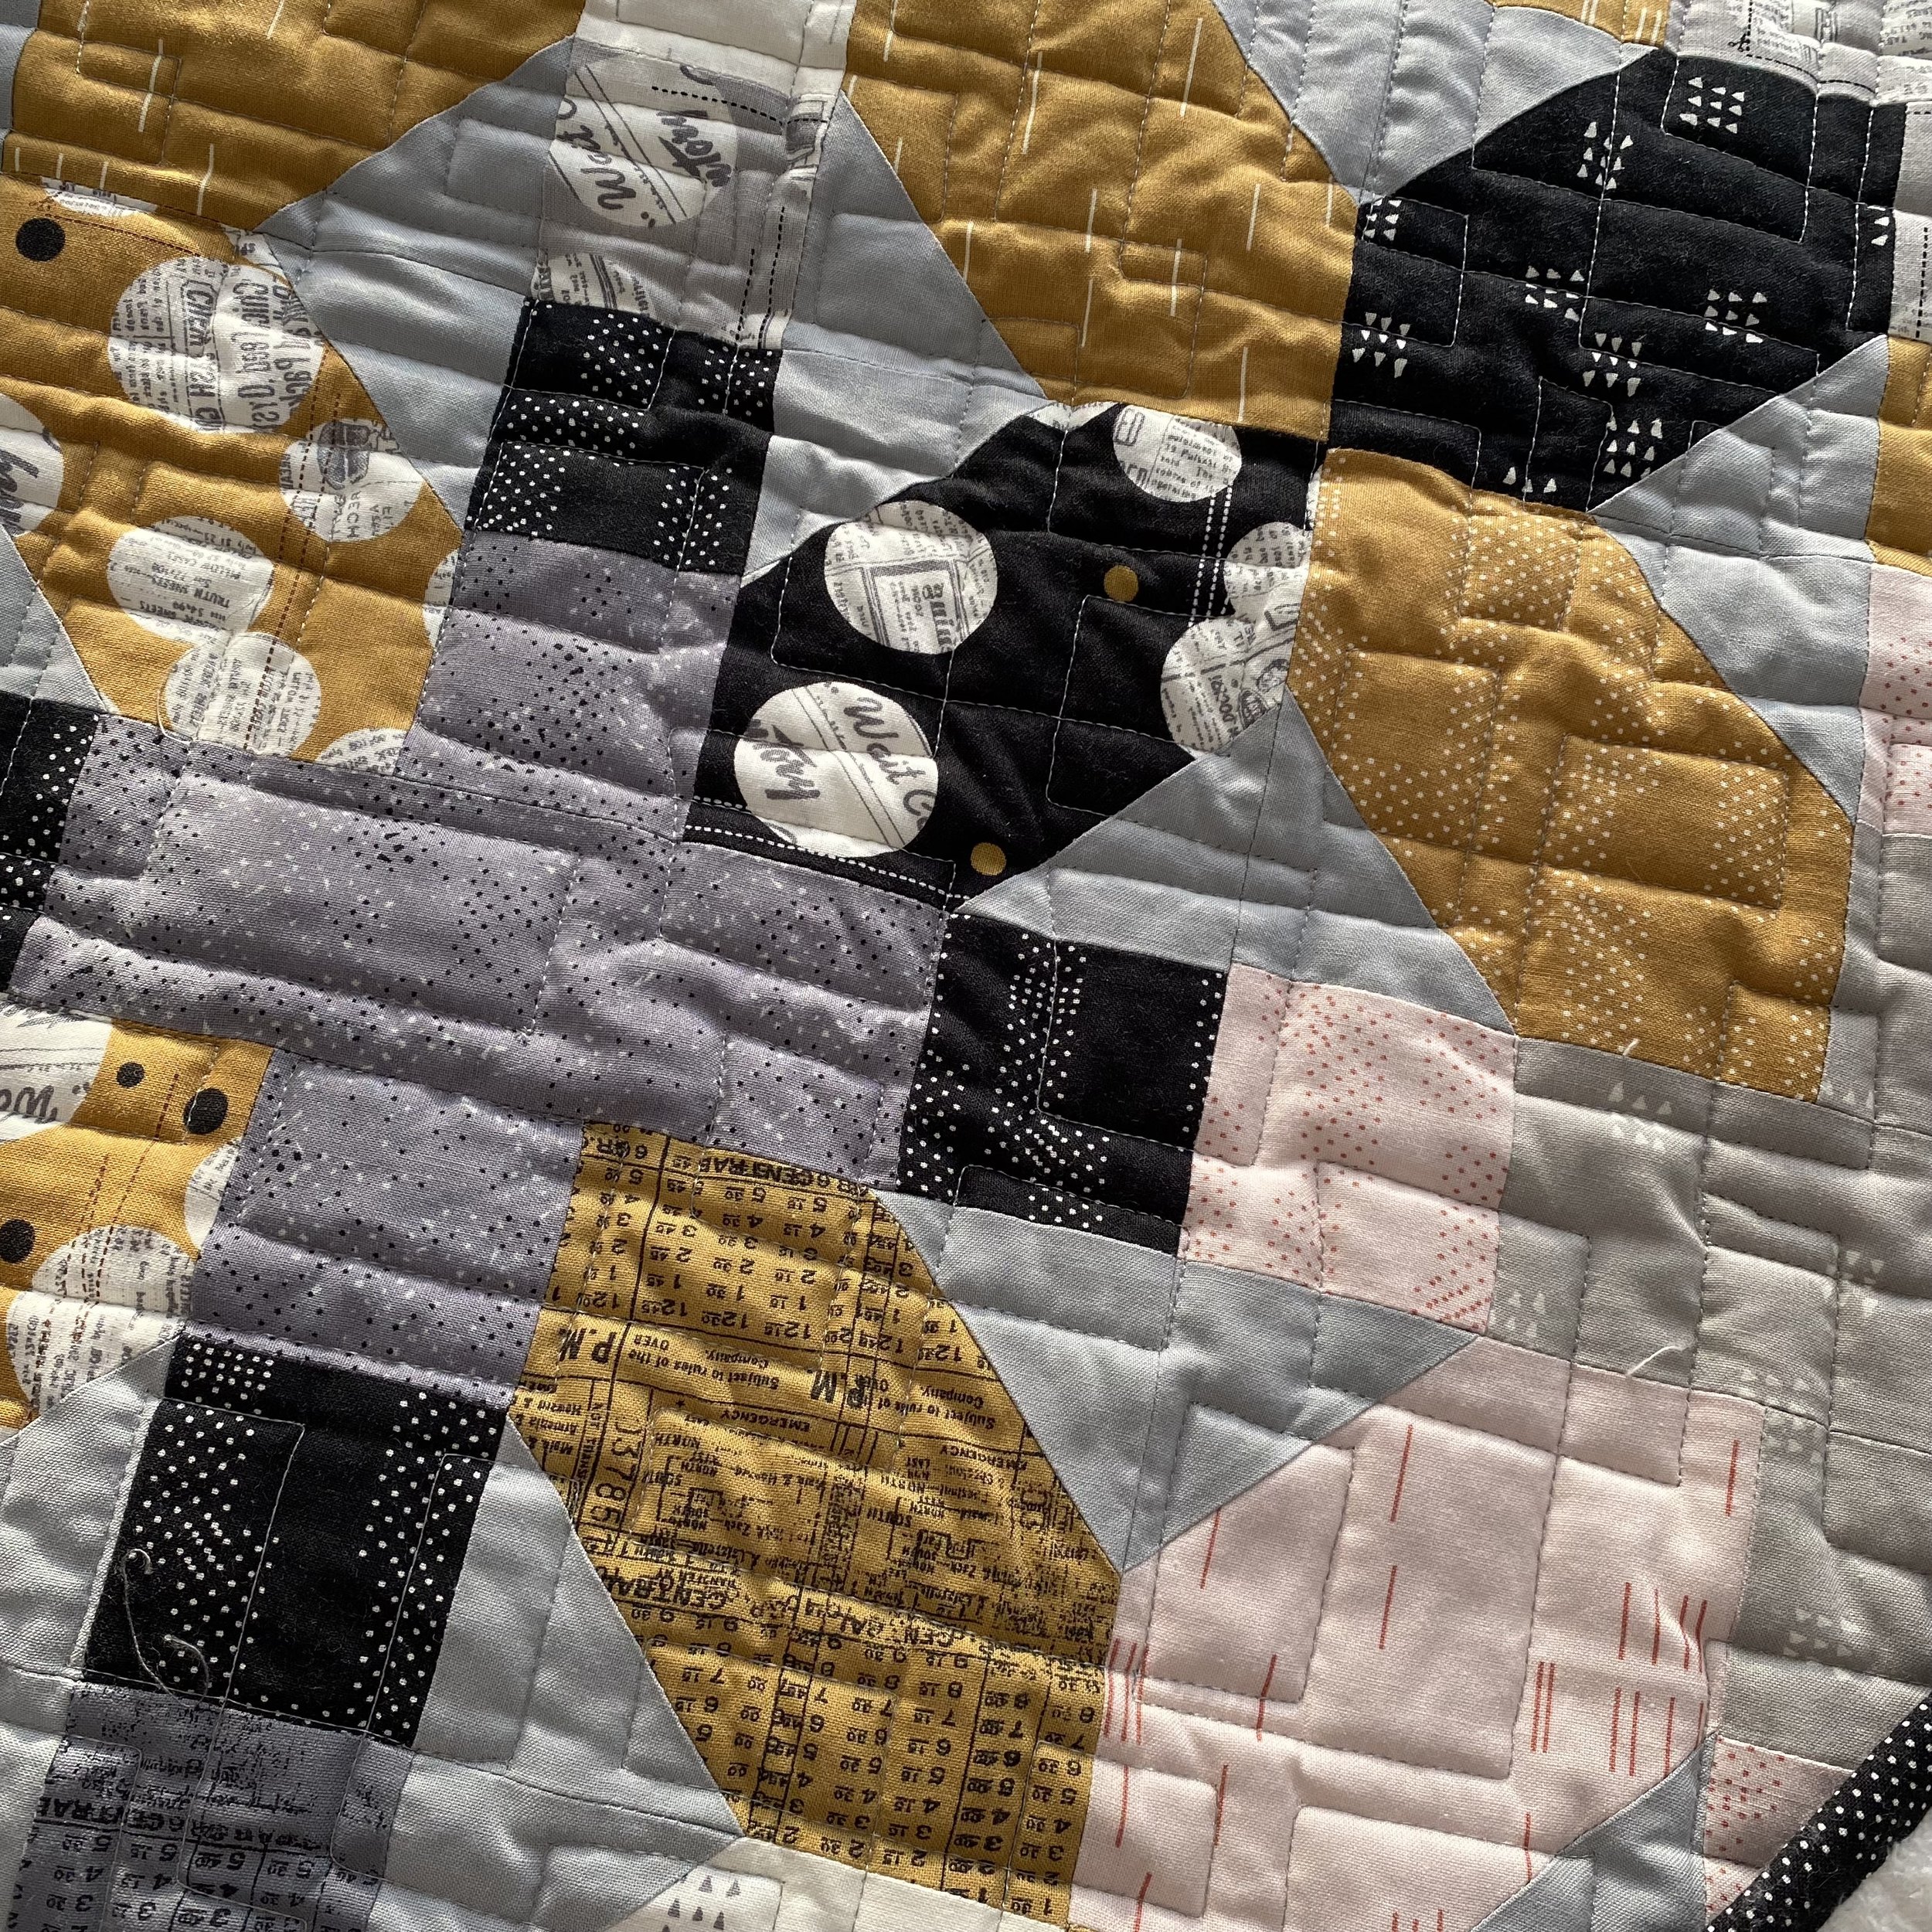 25 Fast and Free Quilt Patterns - Quilting